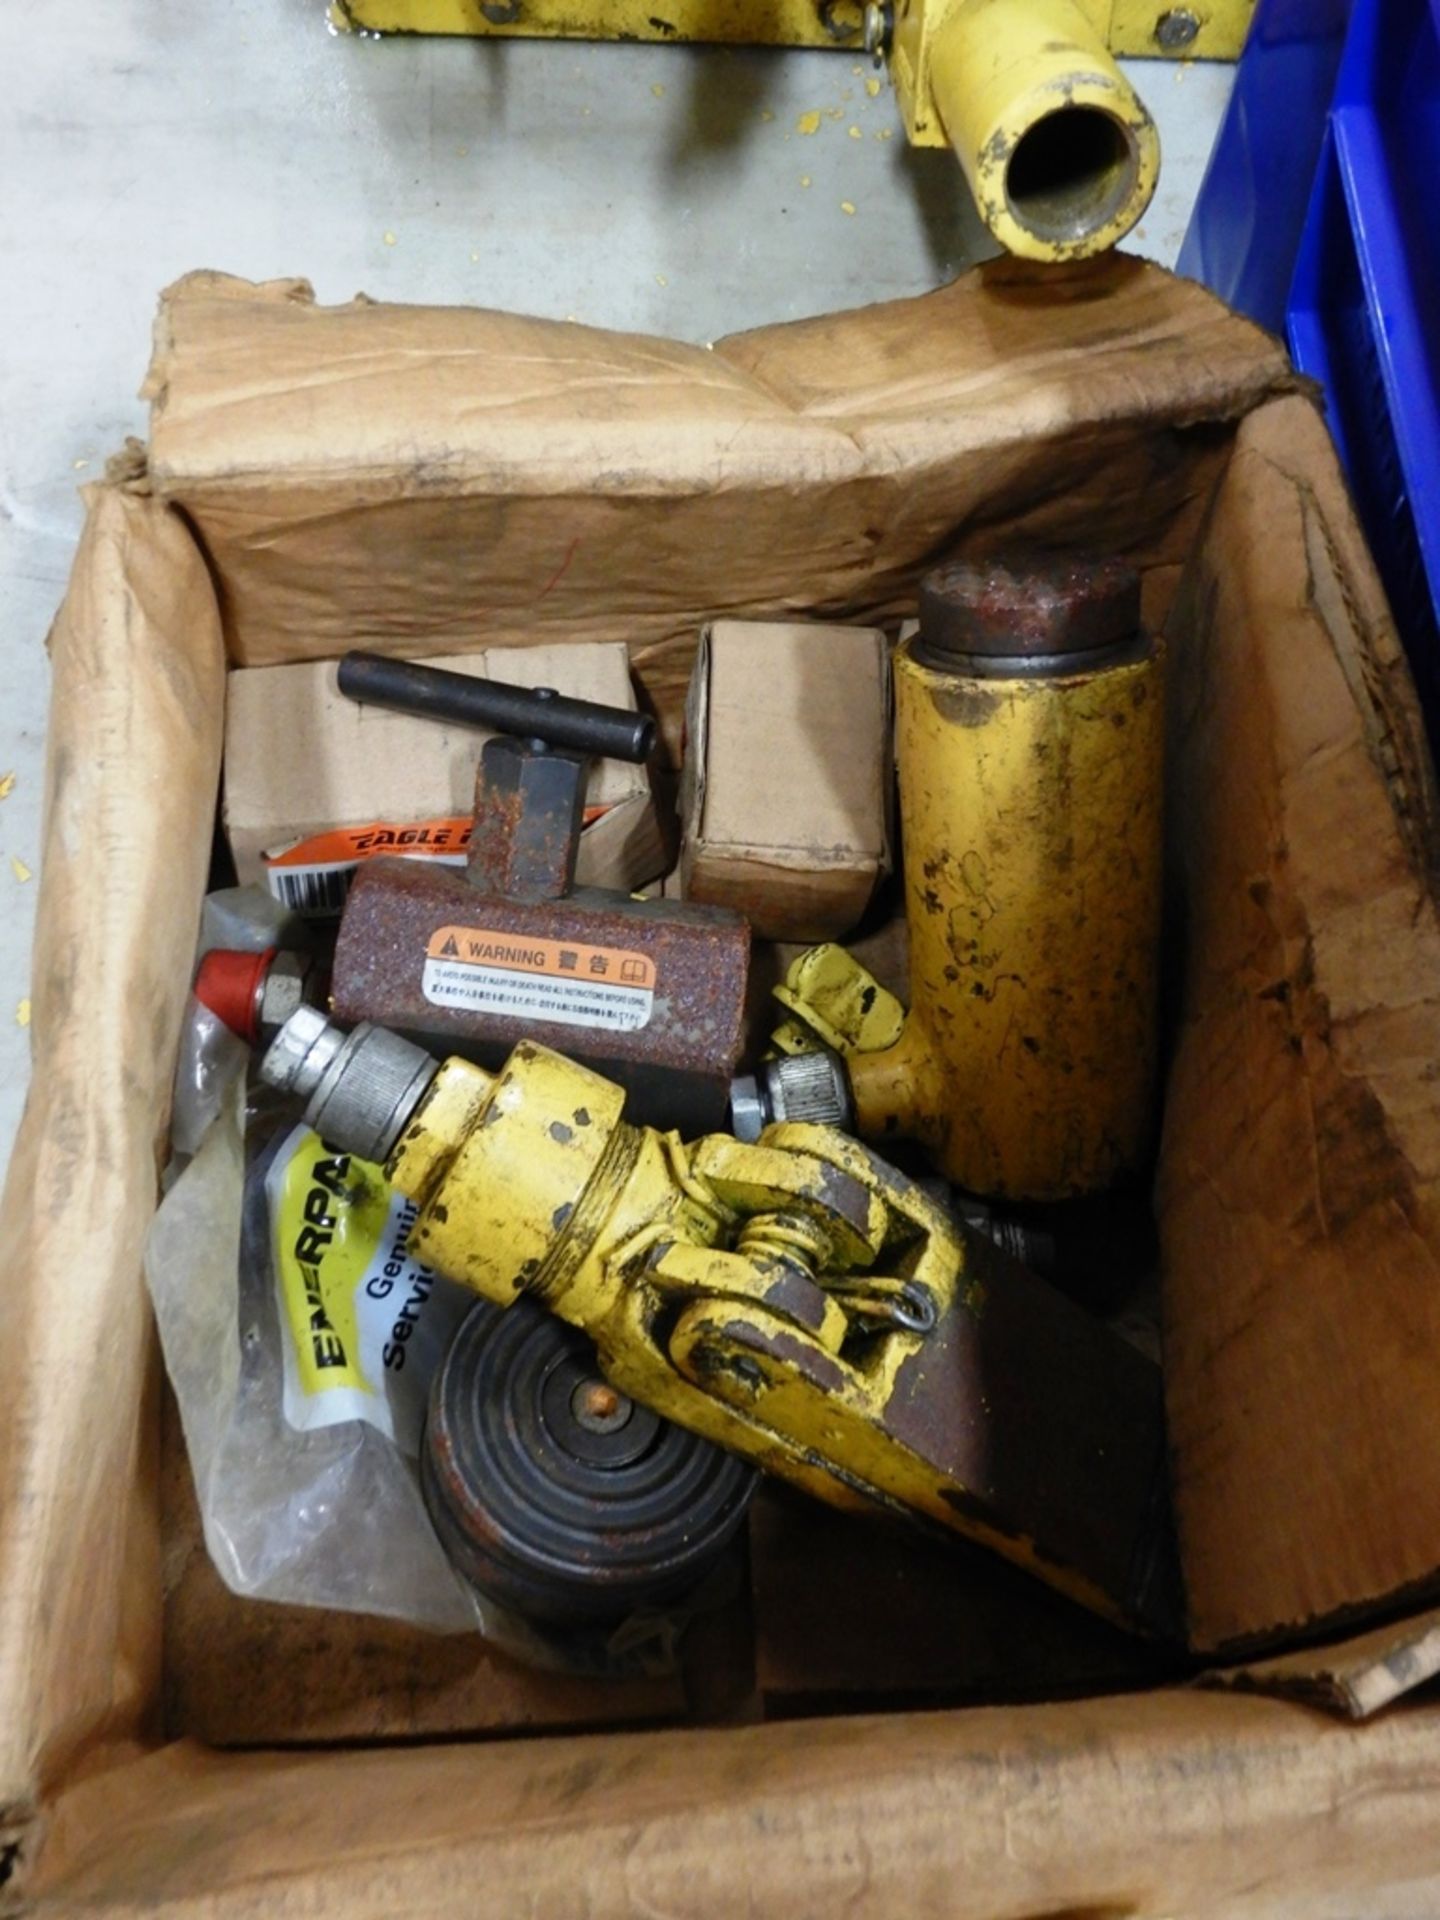 ENERPAC P464 SIMPLEX 2 STAGE HAND PUMP W/ 4 WAY VALVE W/ ATTACHMENTS - Image 3 of 4